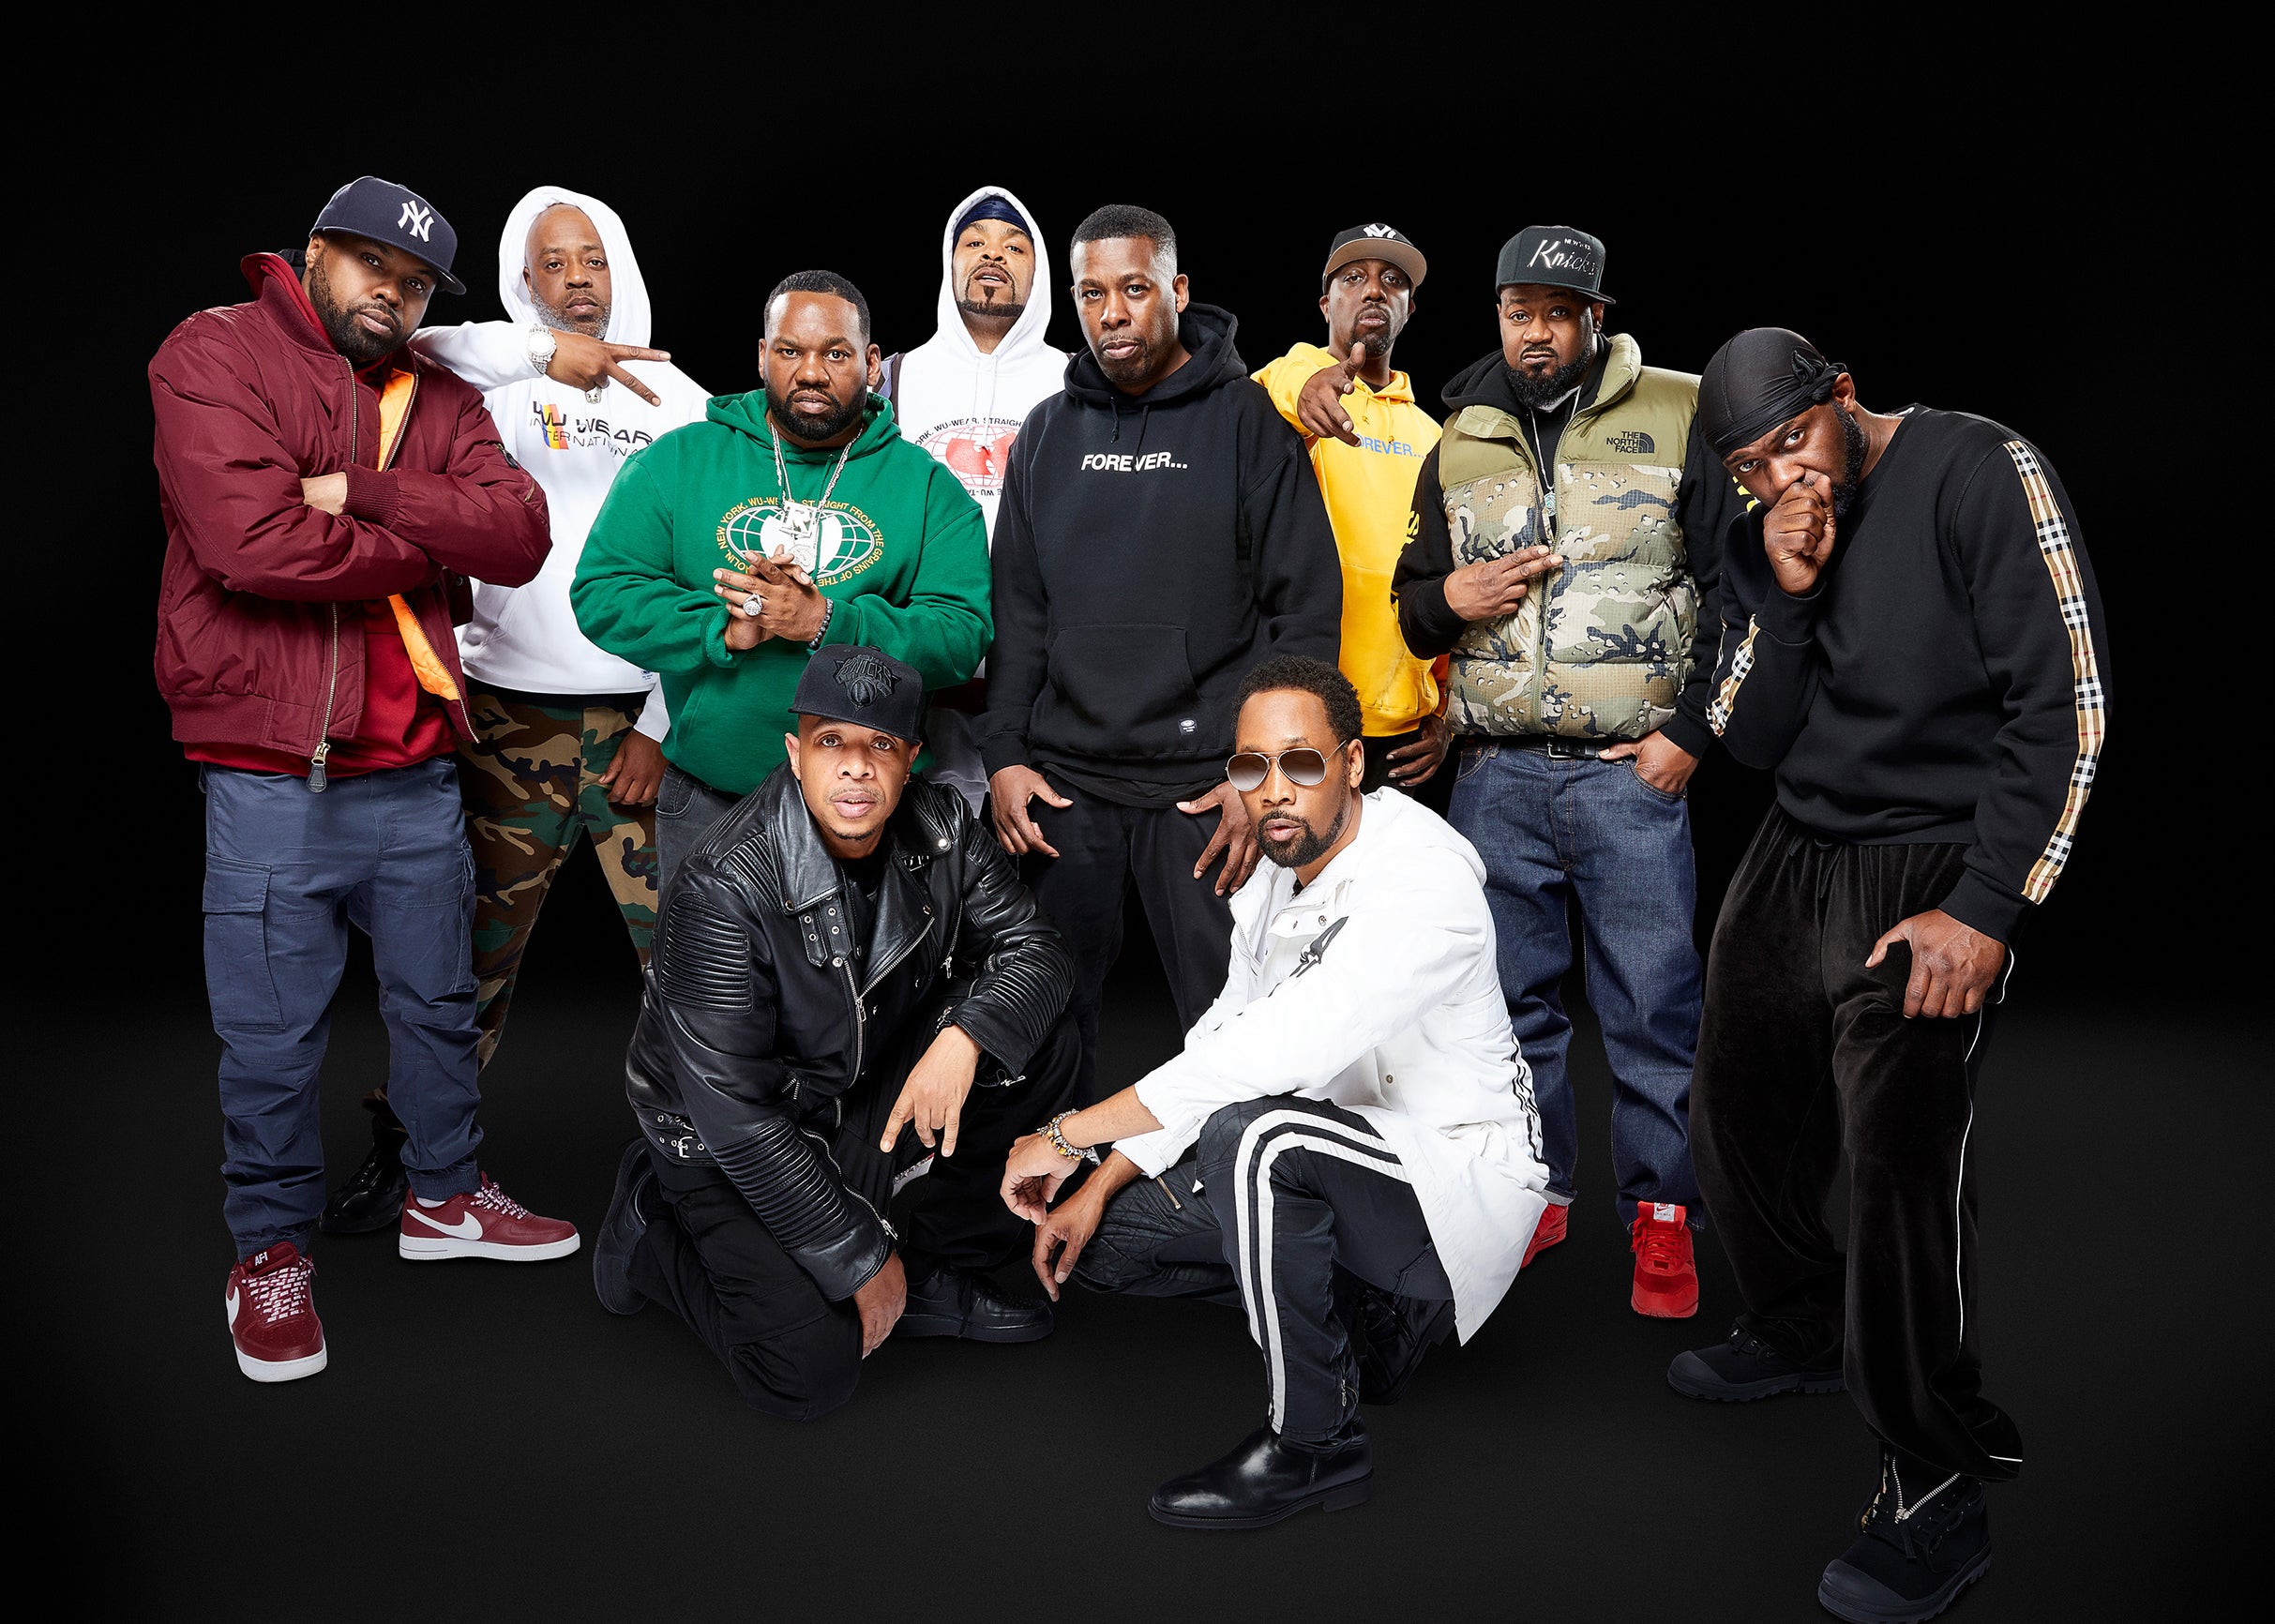 Wu-Tang Clan & Nas: NY State Of Mind Tour presale code for legit tickets in Calgary